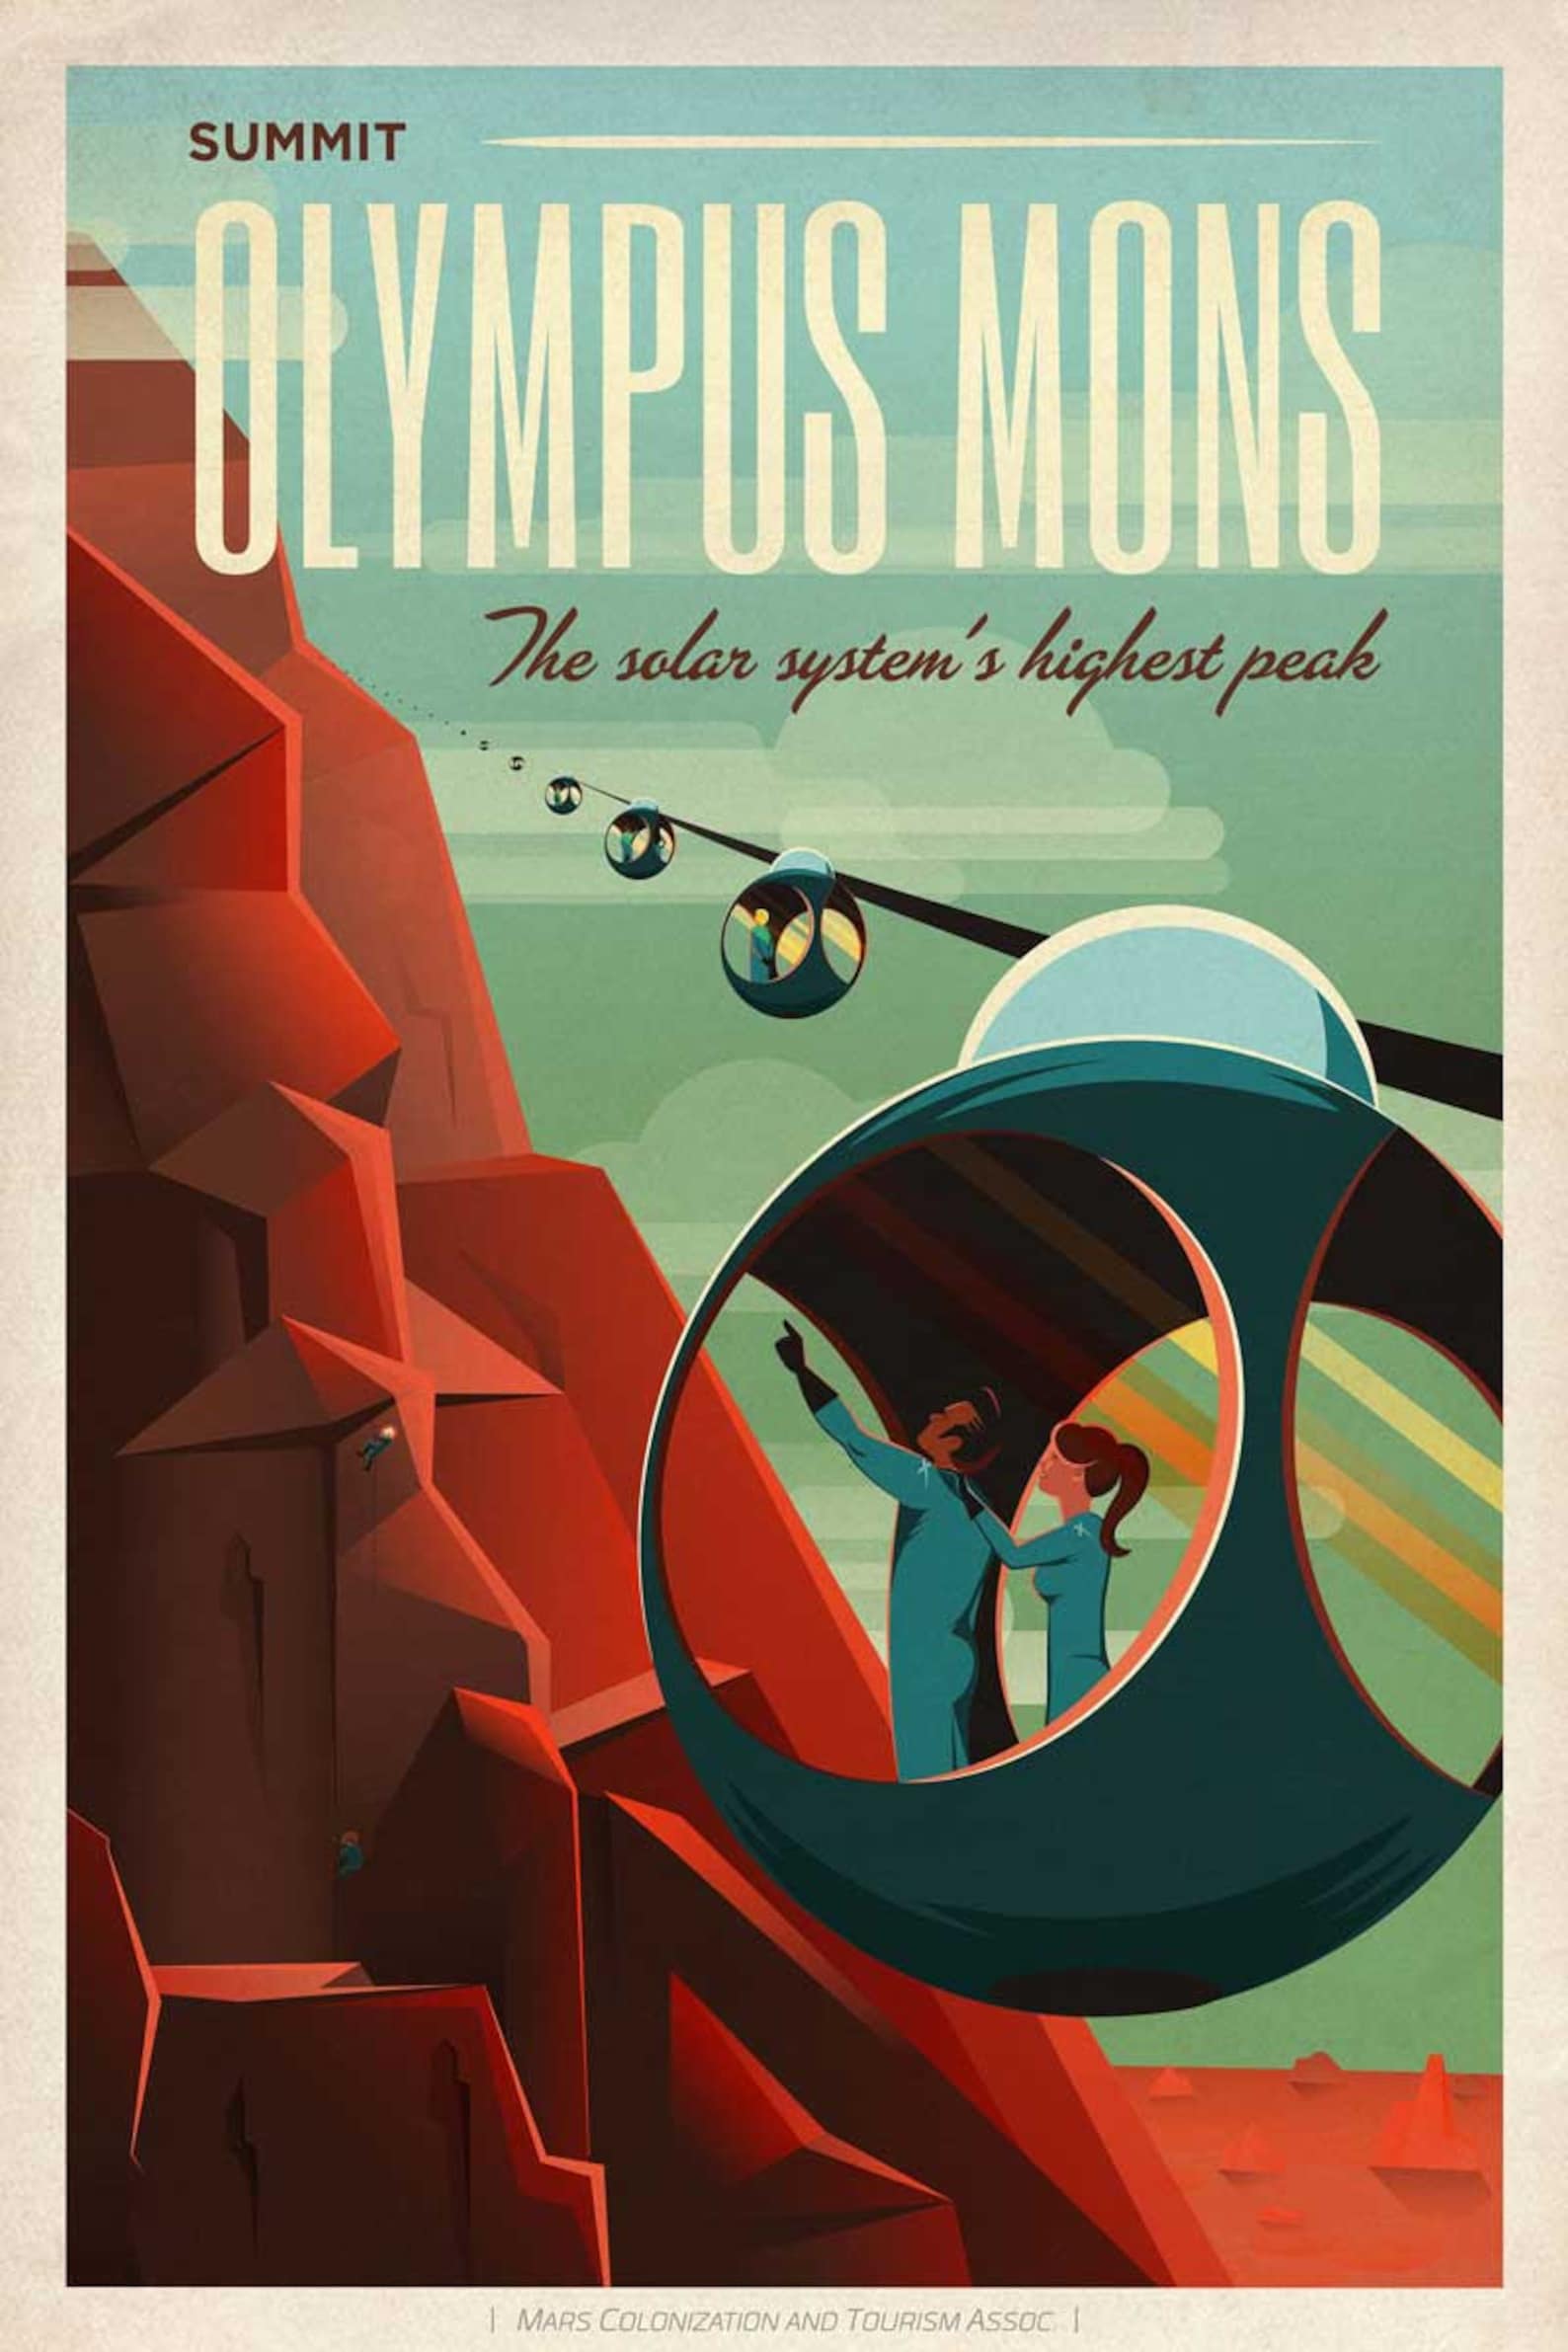 space tourism poster etsy